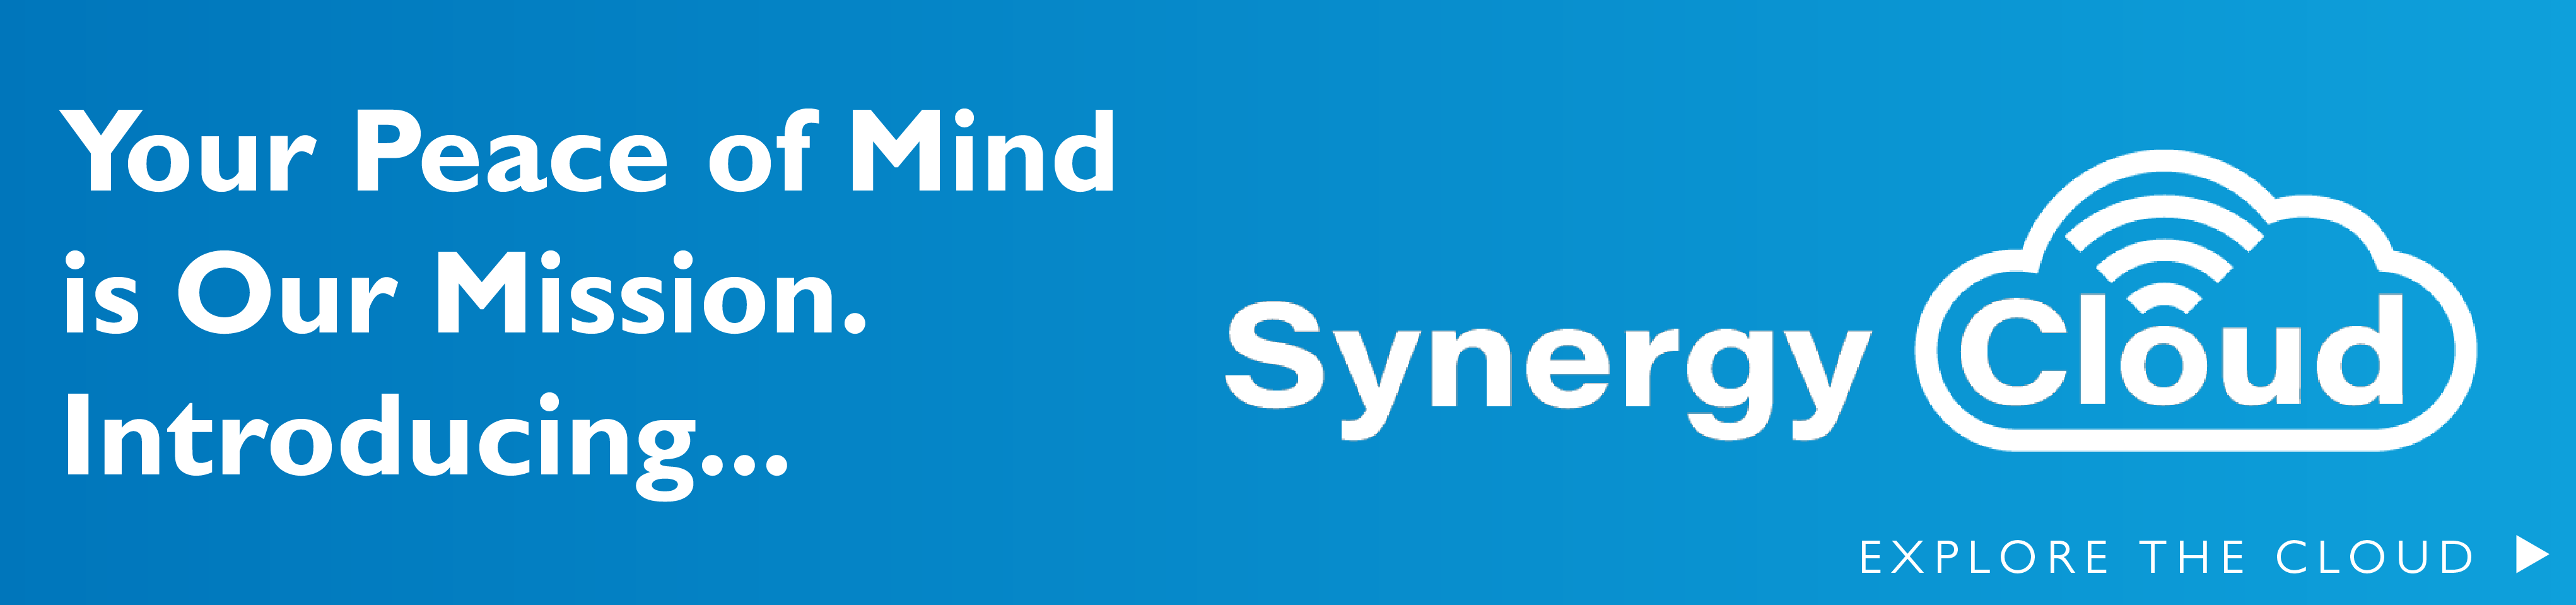 Introducing Synergy Cloud